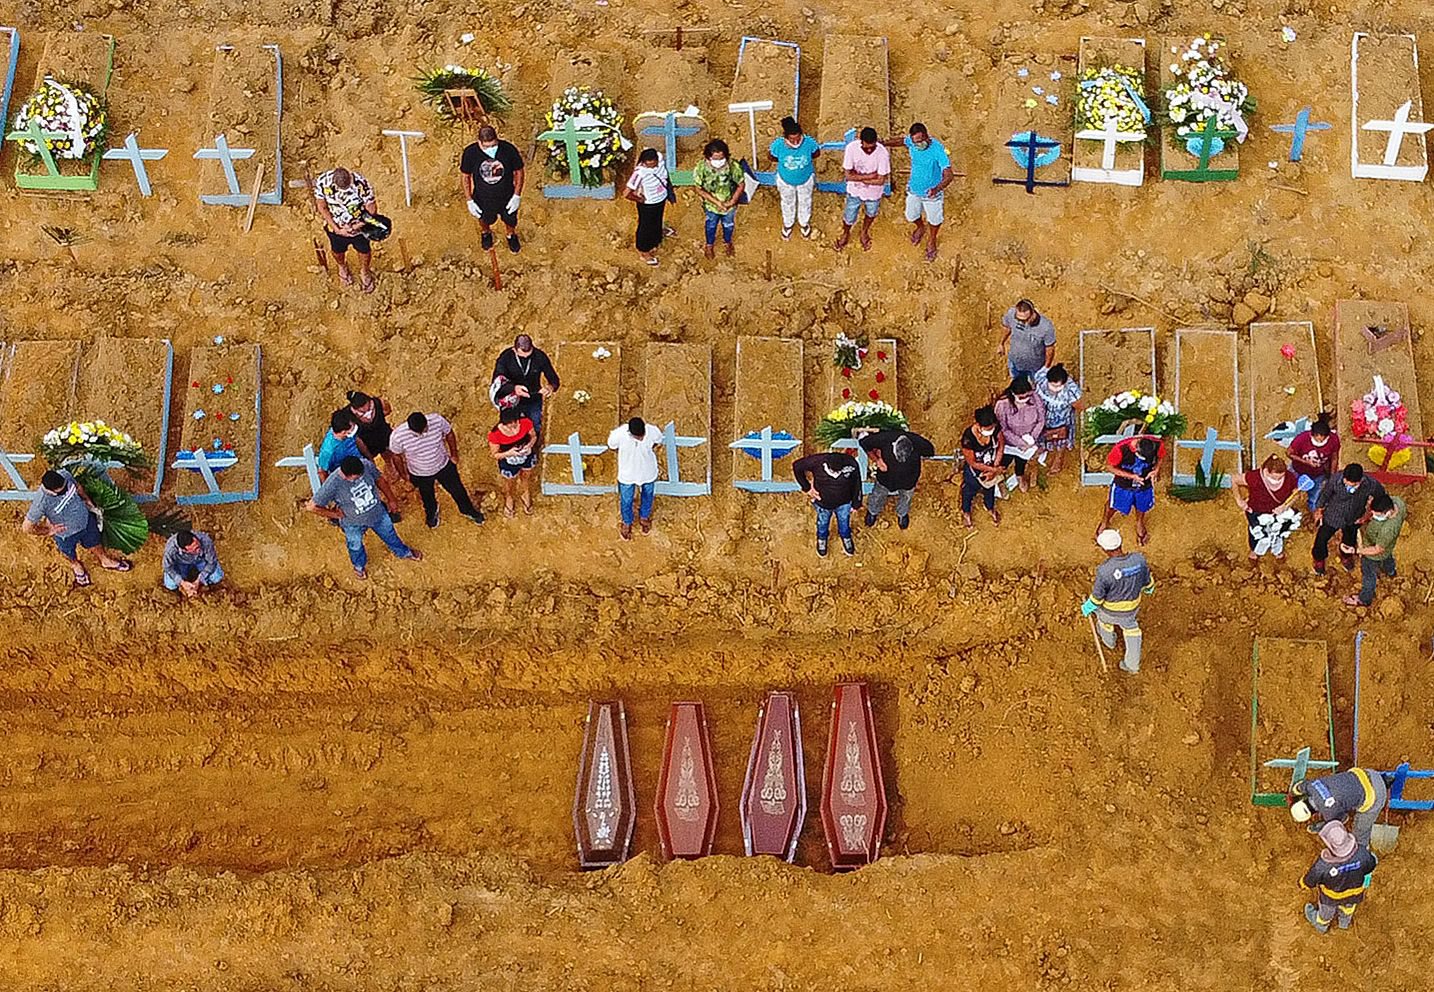 Aerial picture showing a burial taking place at an area where new graves have been dug up at the Nossa Senhora Aparecida cemetery in Manaus, in the Amazon forest in Brazil, on April 22, 2020. - The new grave area hosts suspected and confirmed victims of the COVID-19 coronavirus pandemic. More than 180,000 people in the world have died from the novel coronavirus since it emerged in China last December, according to an AFP tally based on official sources. (Photo by Michael DANTAS / AFP)